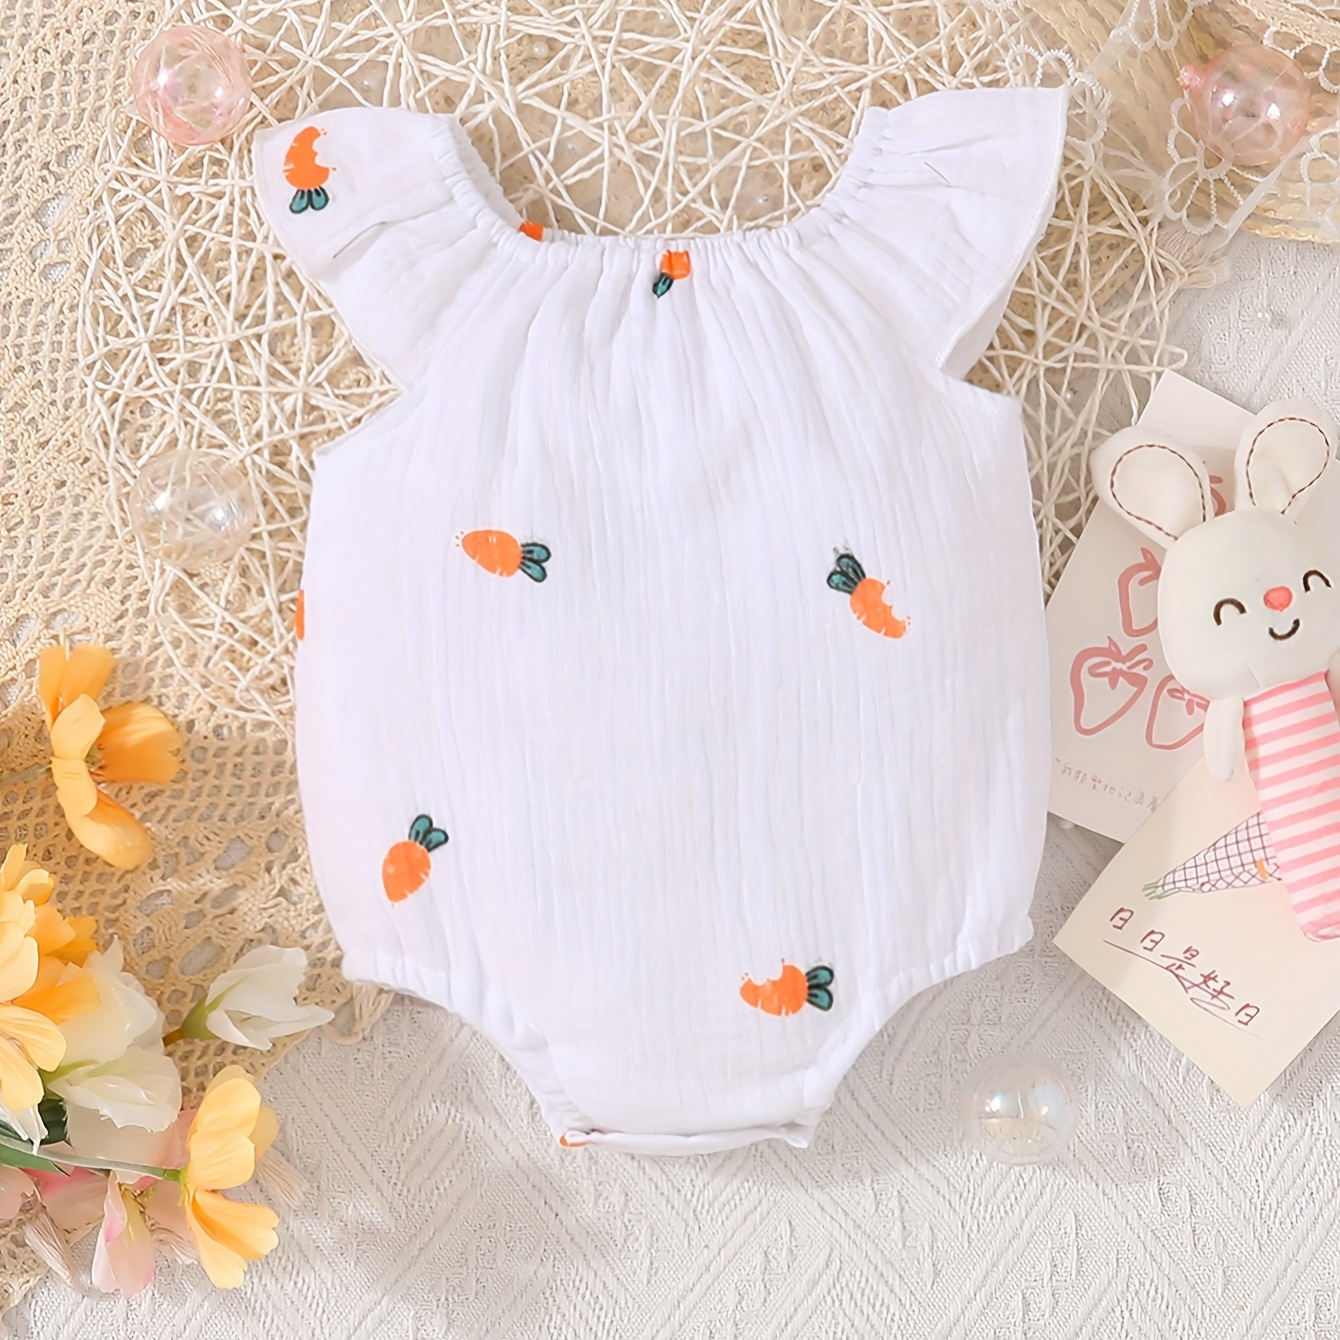 

Cartoon Carrot All-over Print Infant's Cotton Muslin Bodysuit, Comfy Sleeveless Triangle Onesie, Baby Girl's Clothing